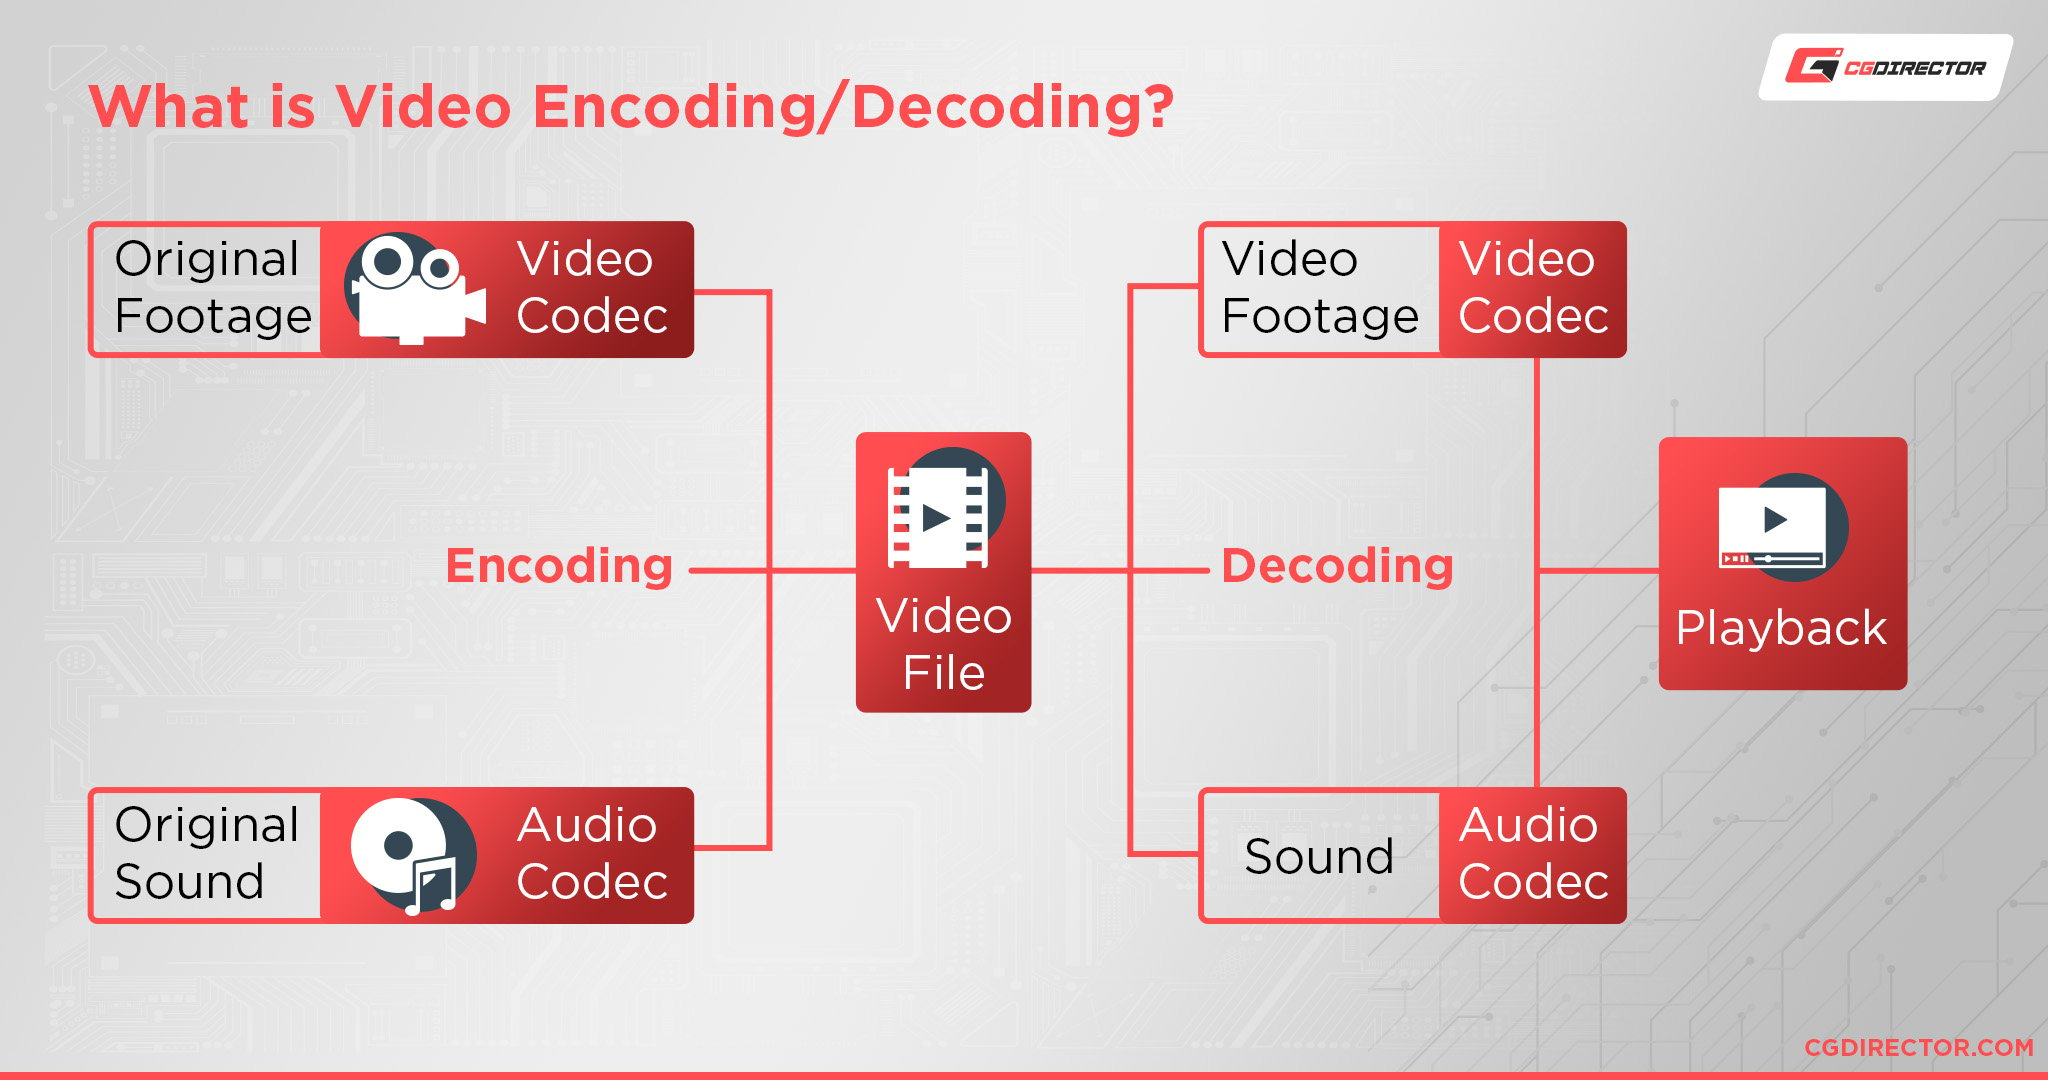 What is Video Encoding and Decoding